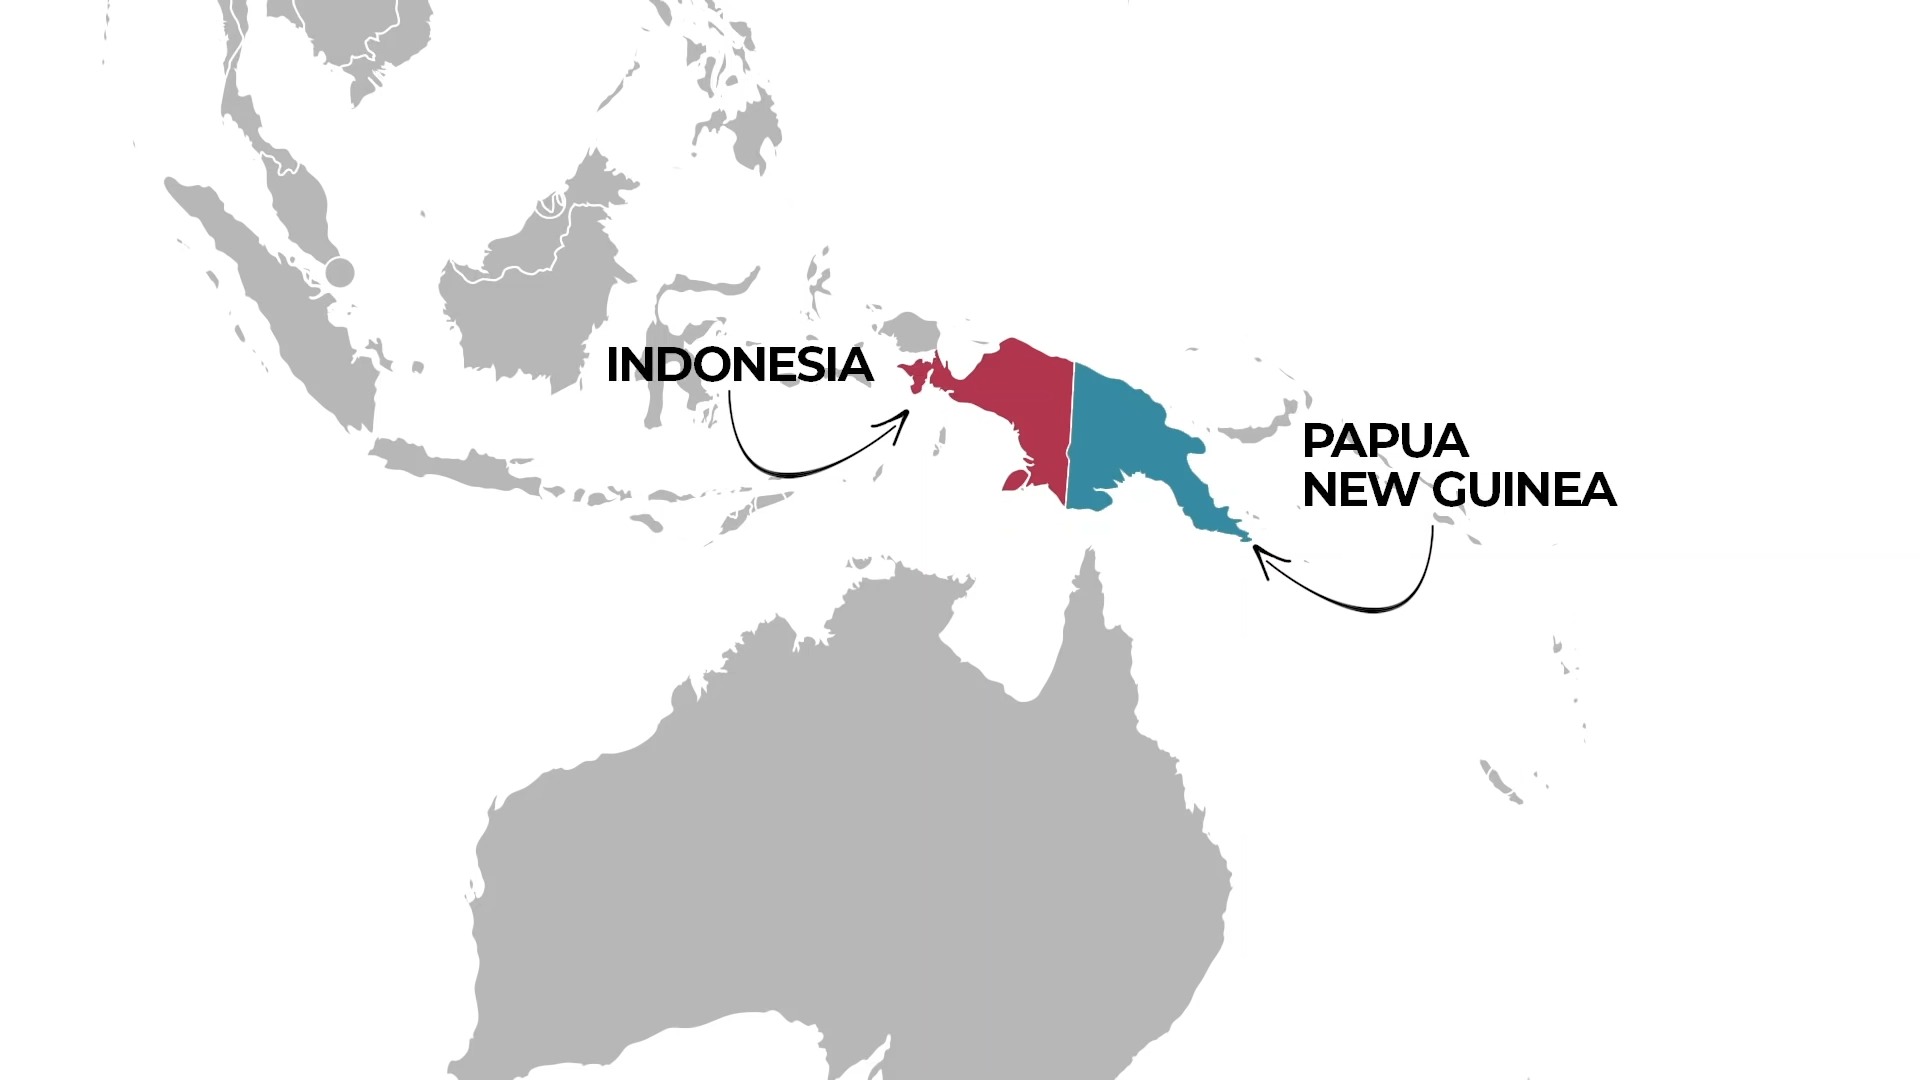 WEST PAPUA want to separate from INDONESIA